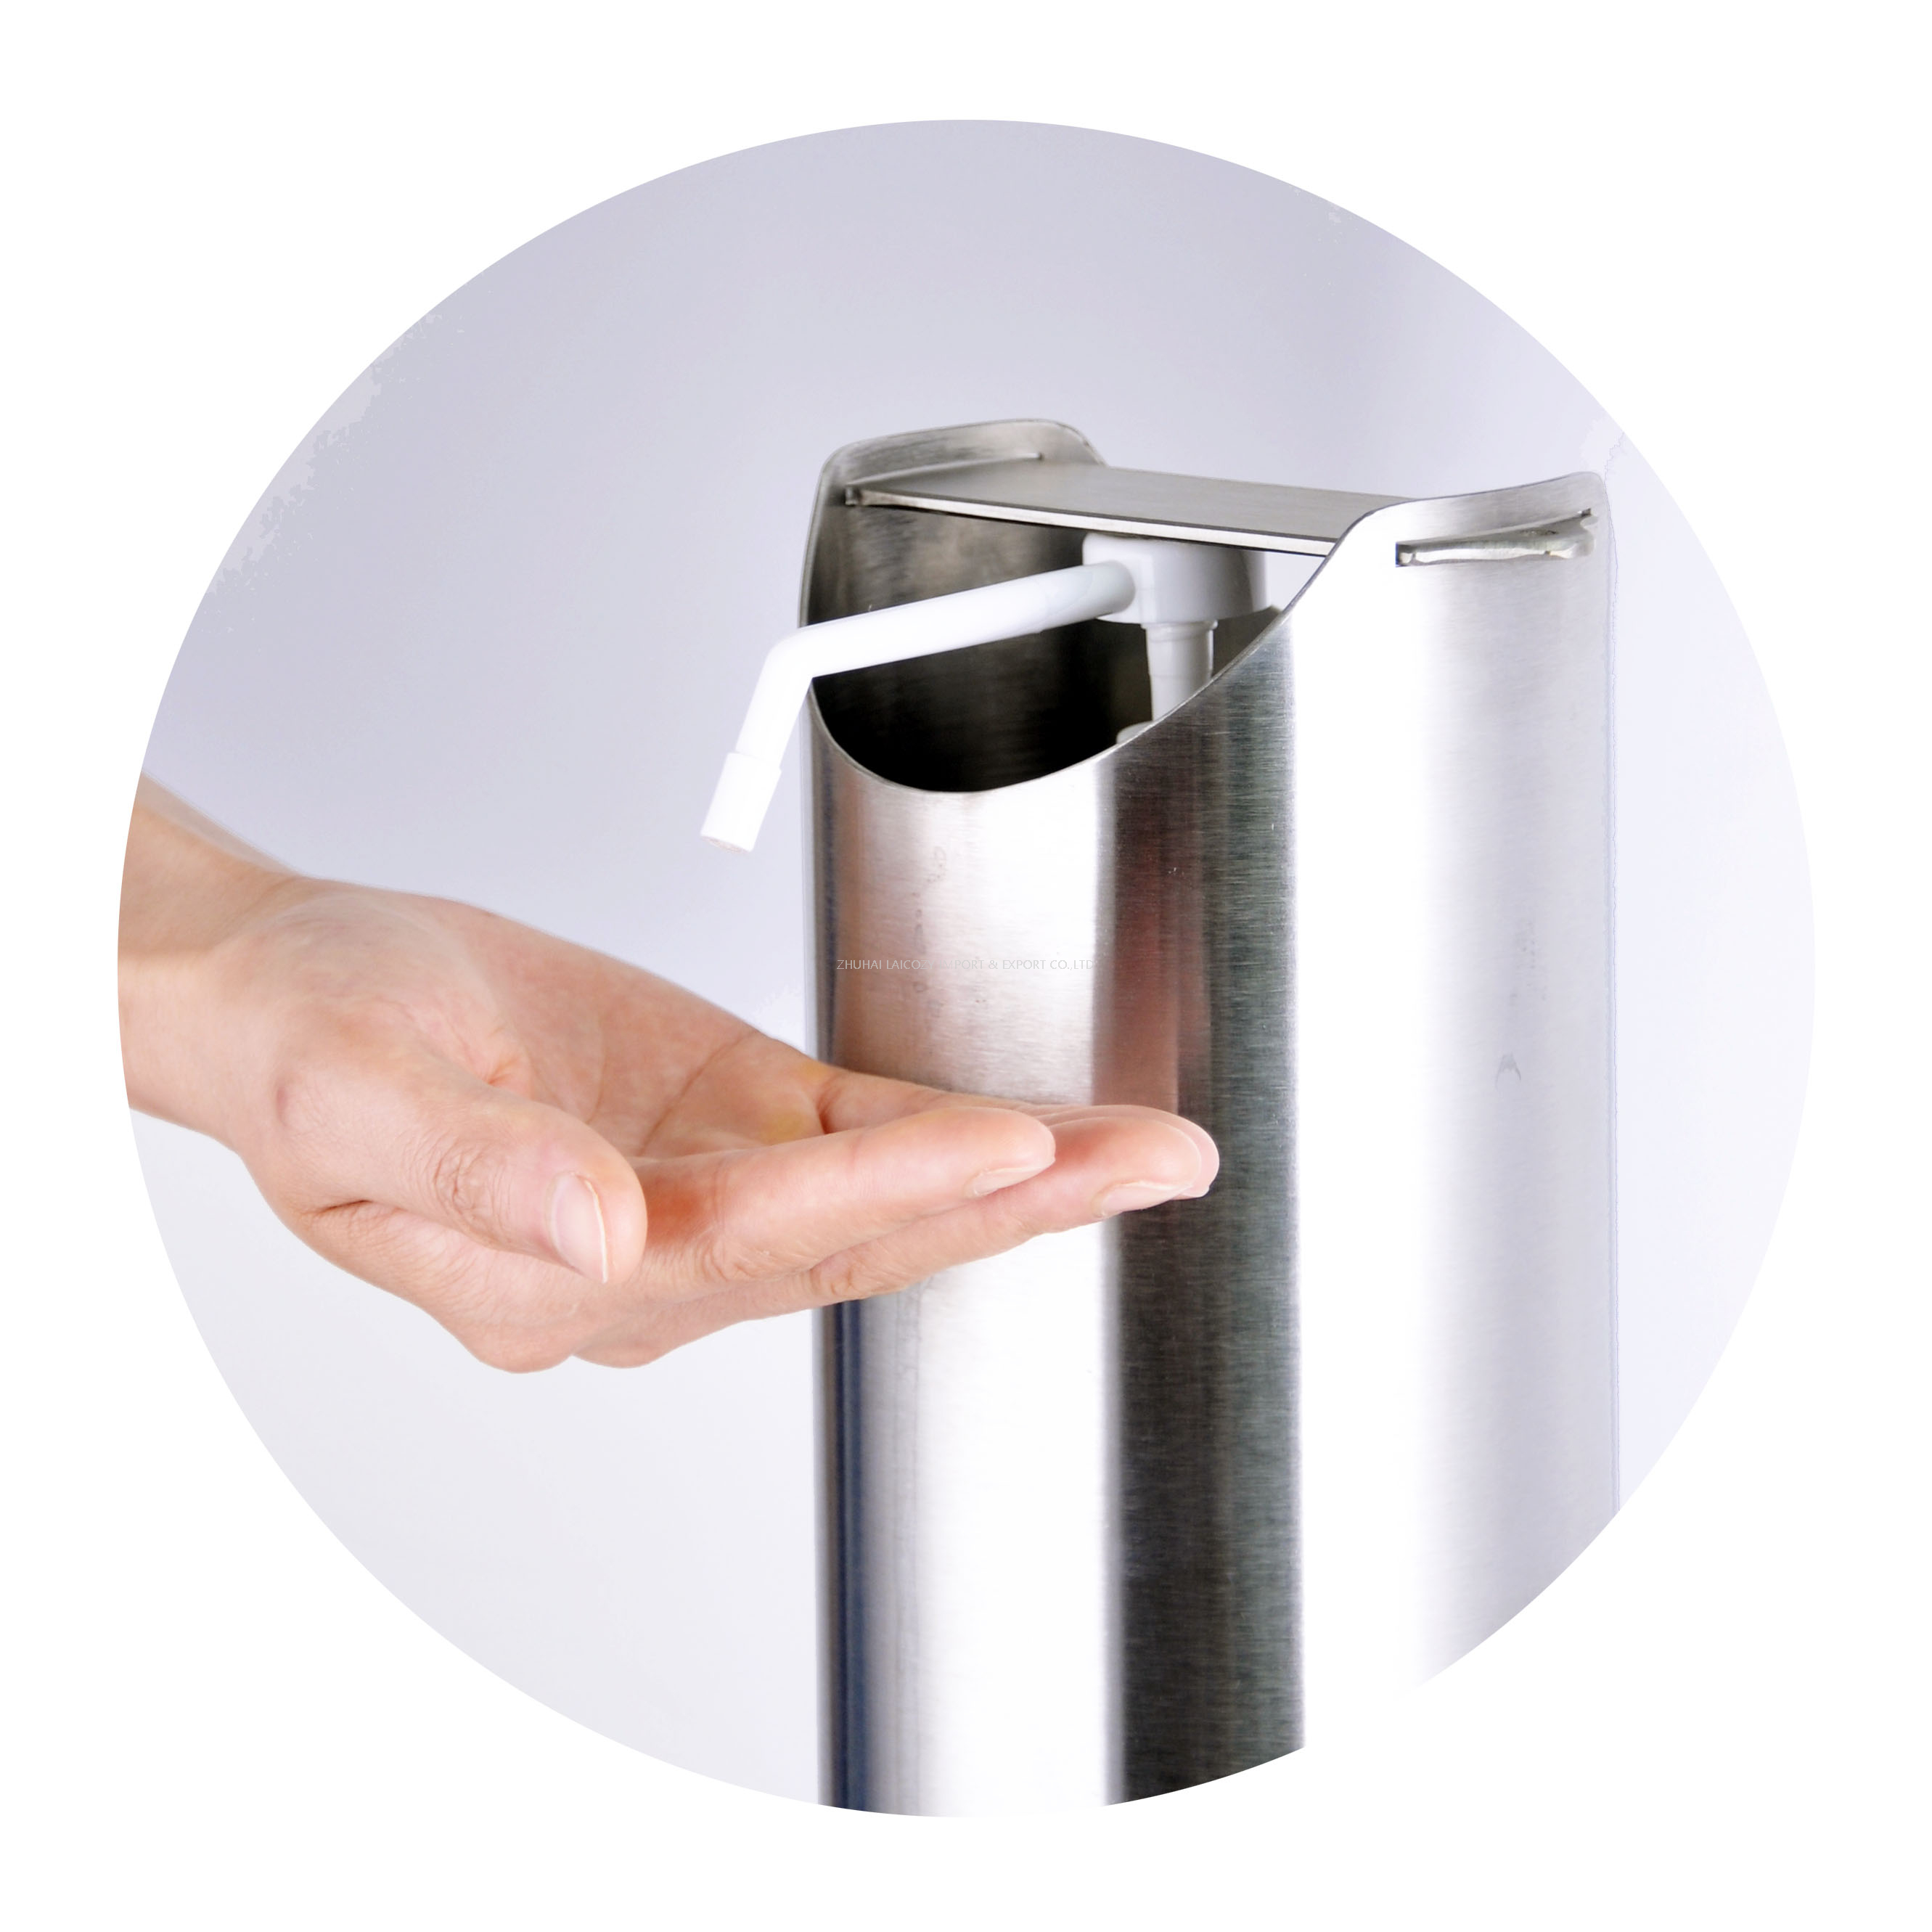 Touchless Foot Pedal Stainless Steel Soap Dispenser Stand 